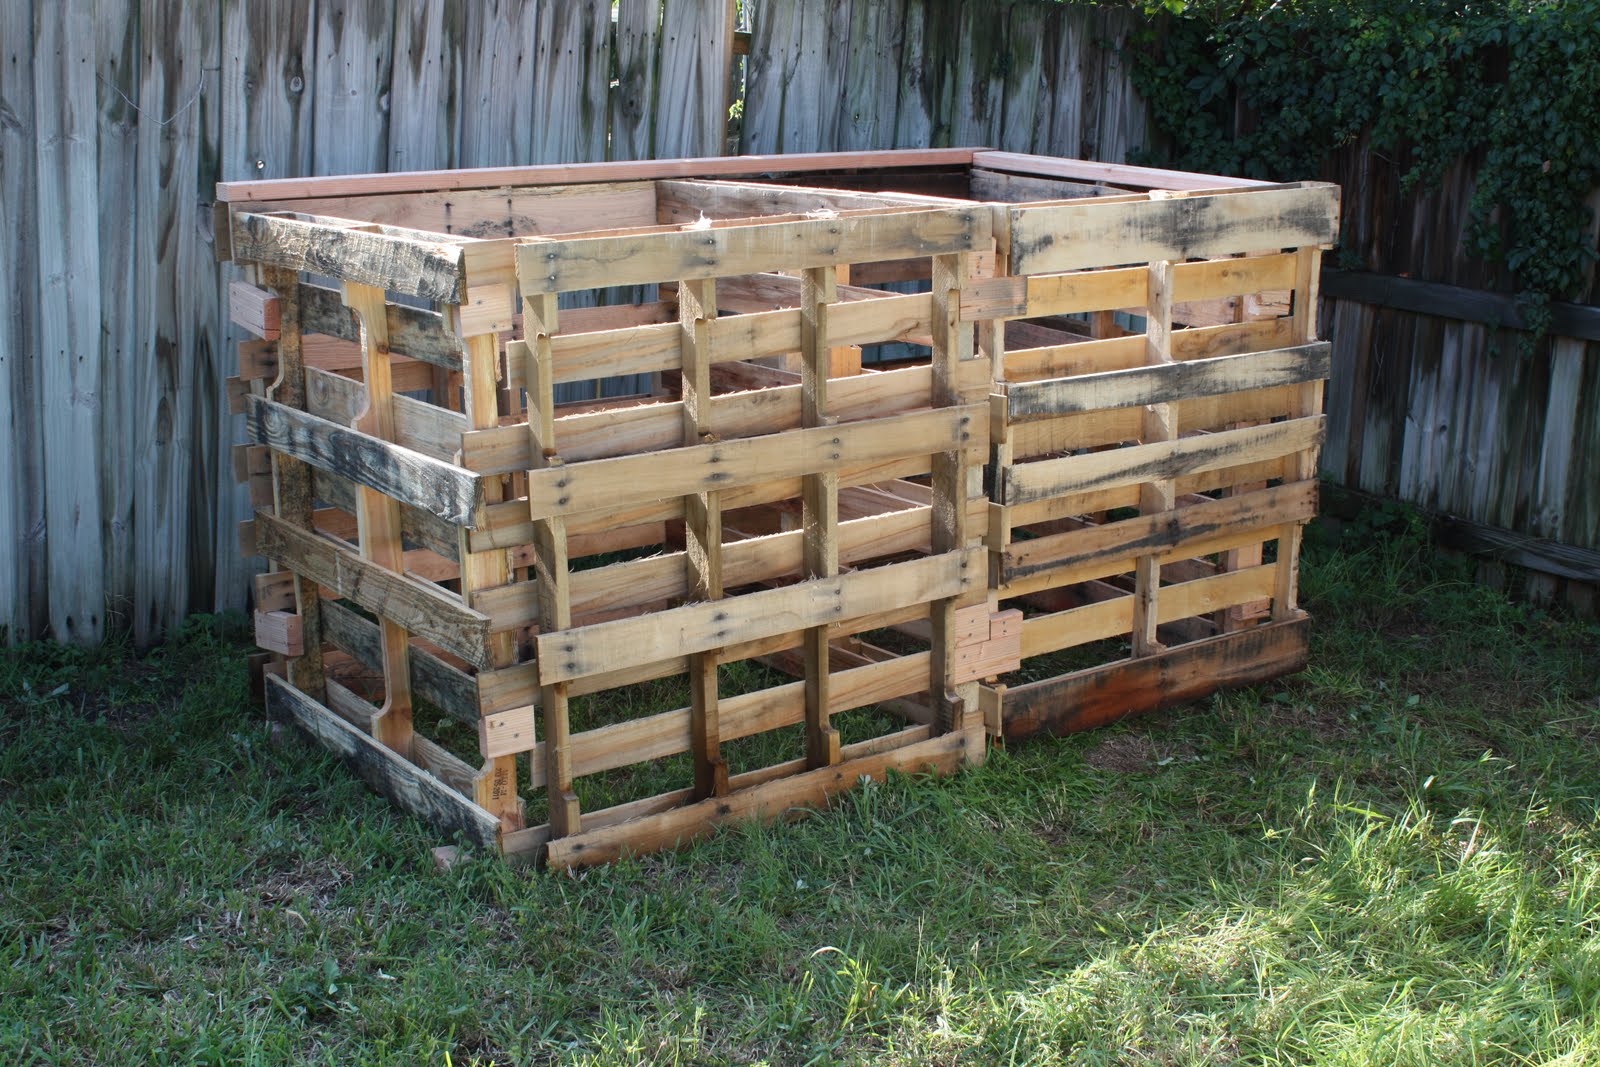 Our SelfSufficient Journey DIY Compost Bin Using Wood